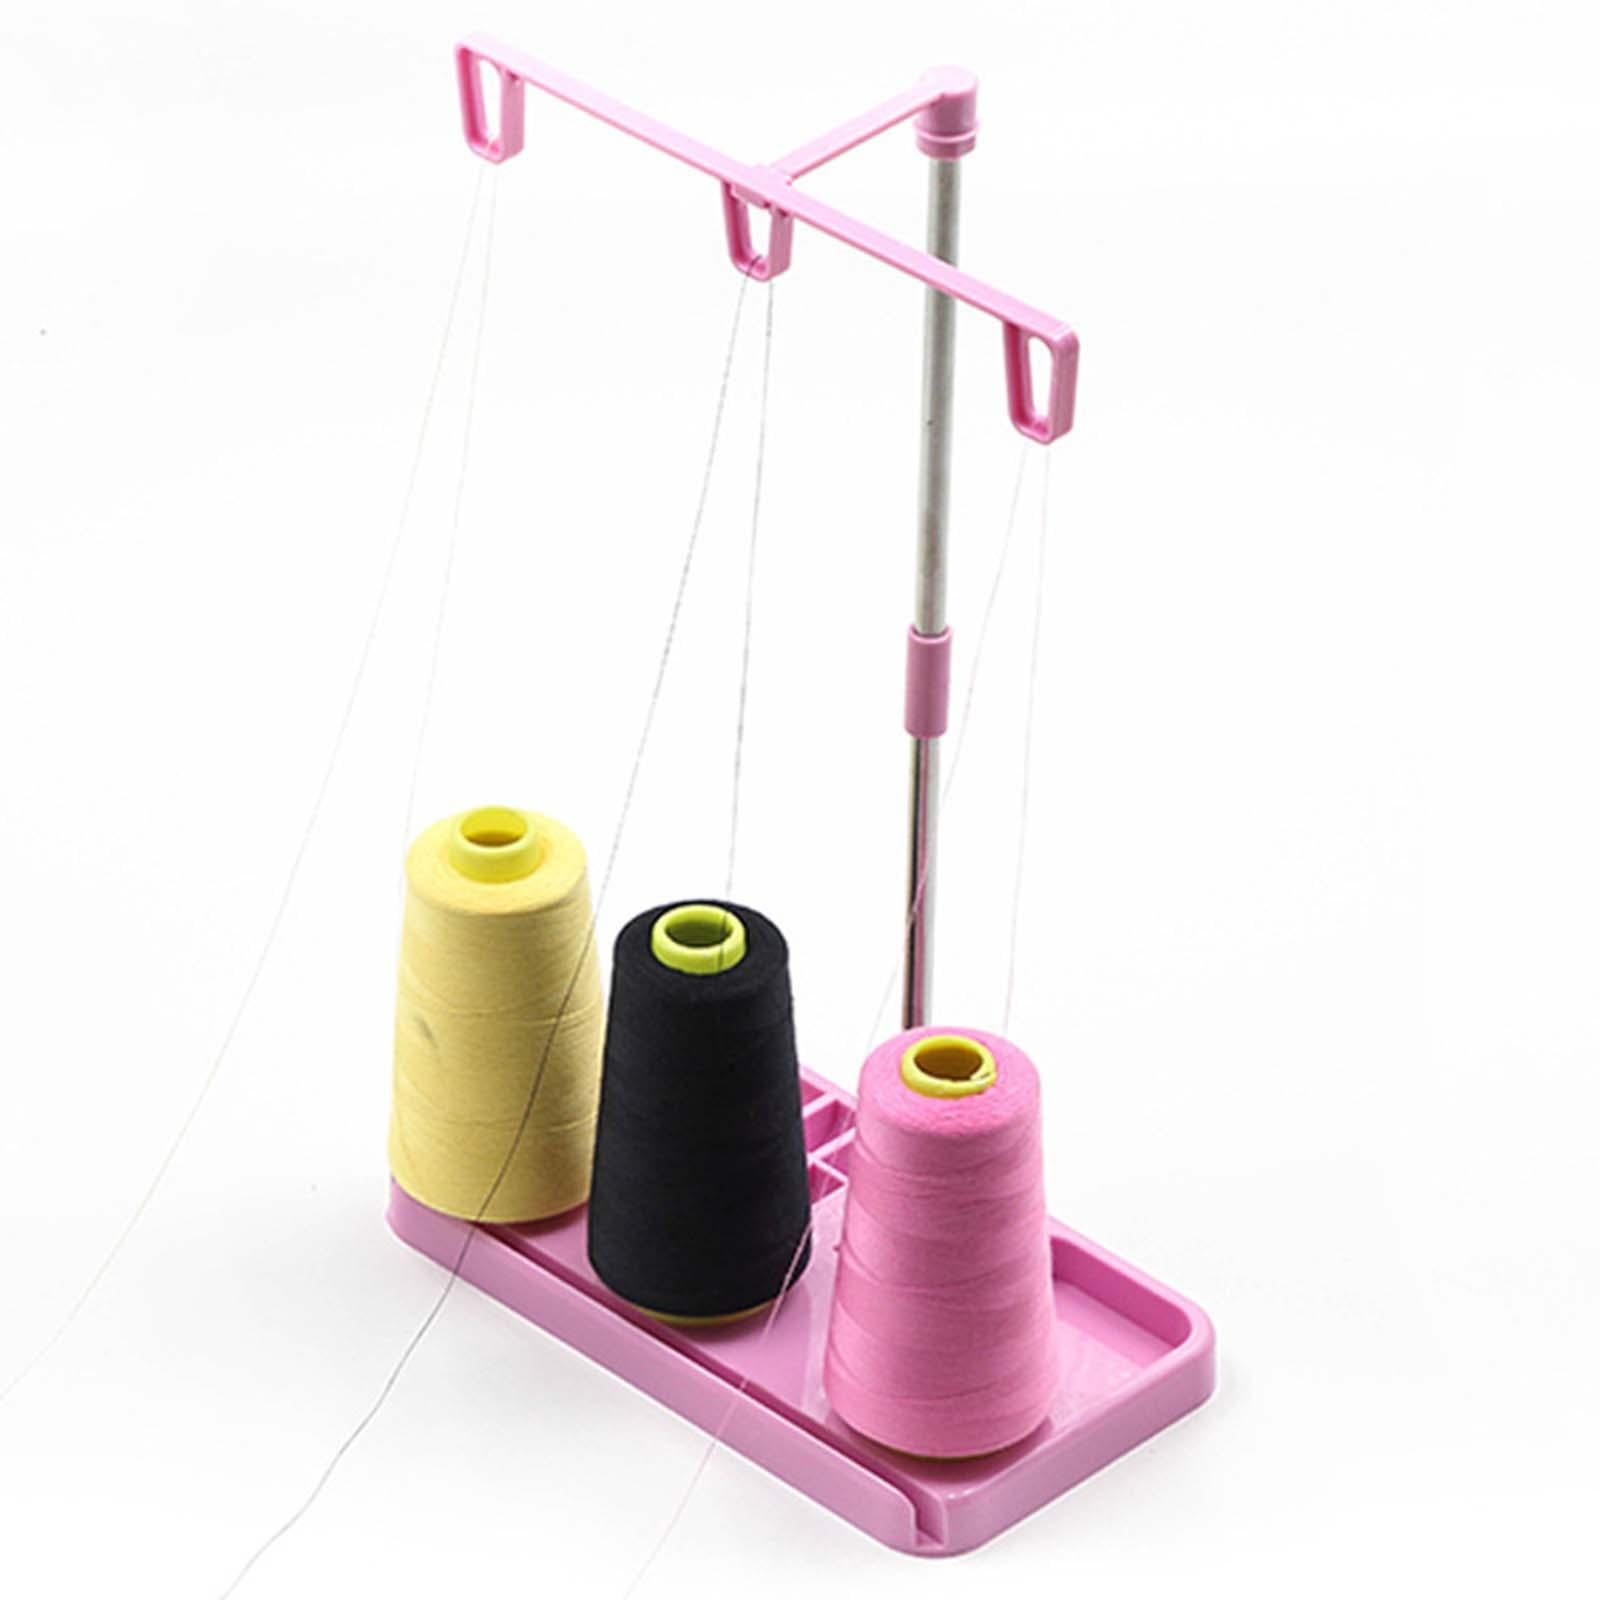 3 Spool Thread Stand Holder in Pink or Blue from ThreadNanny